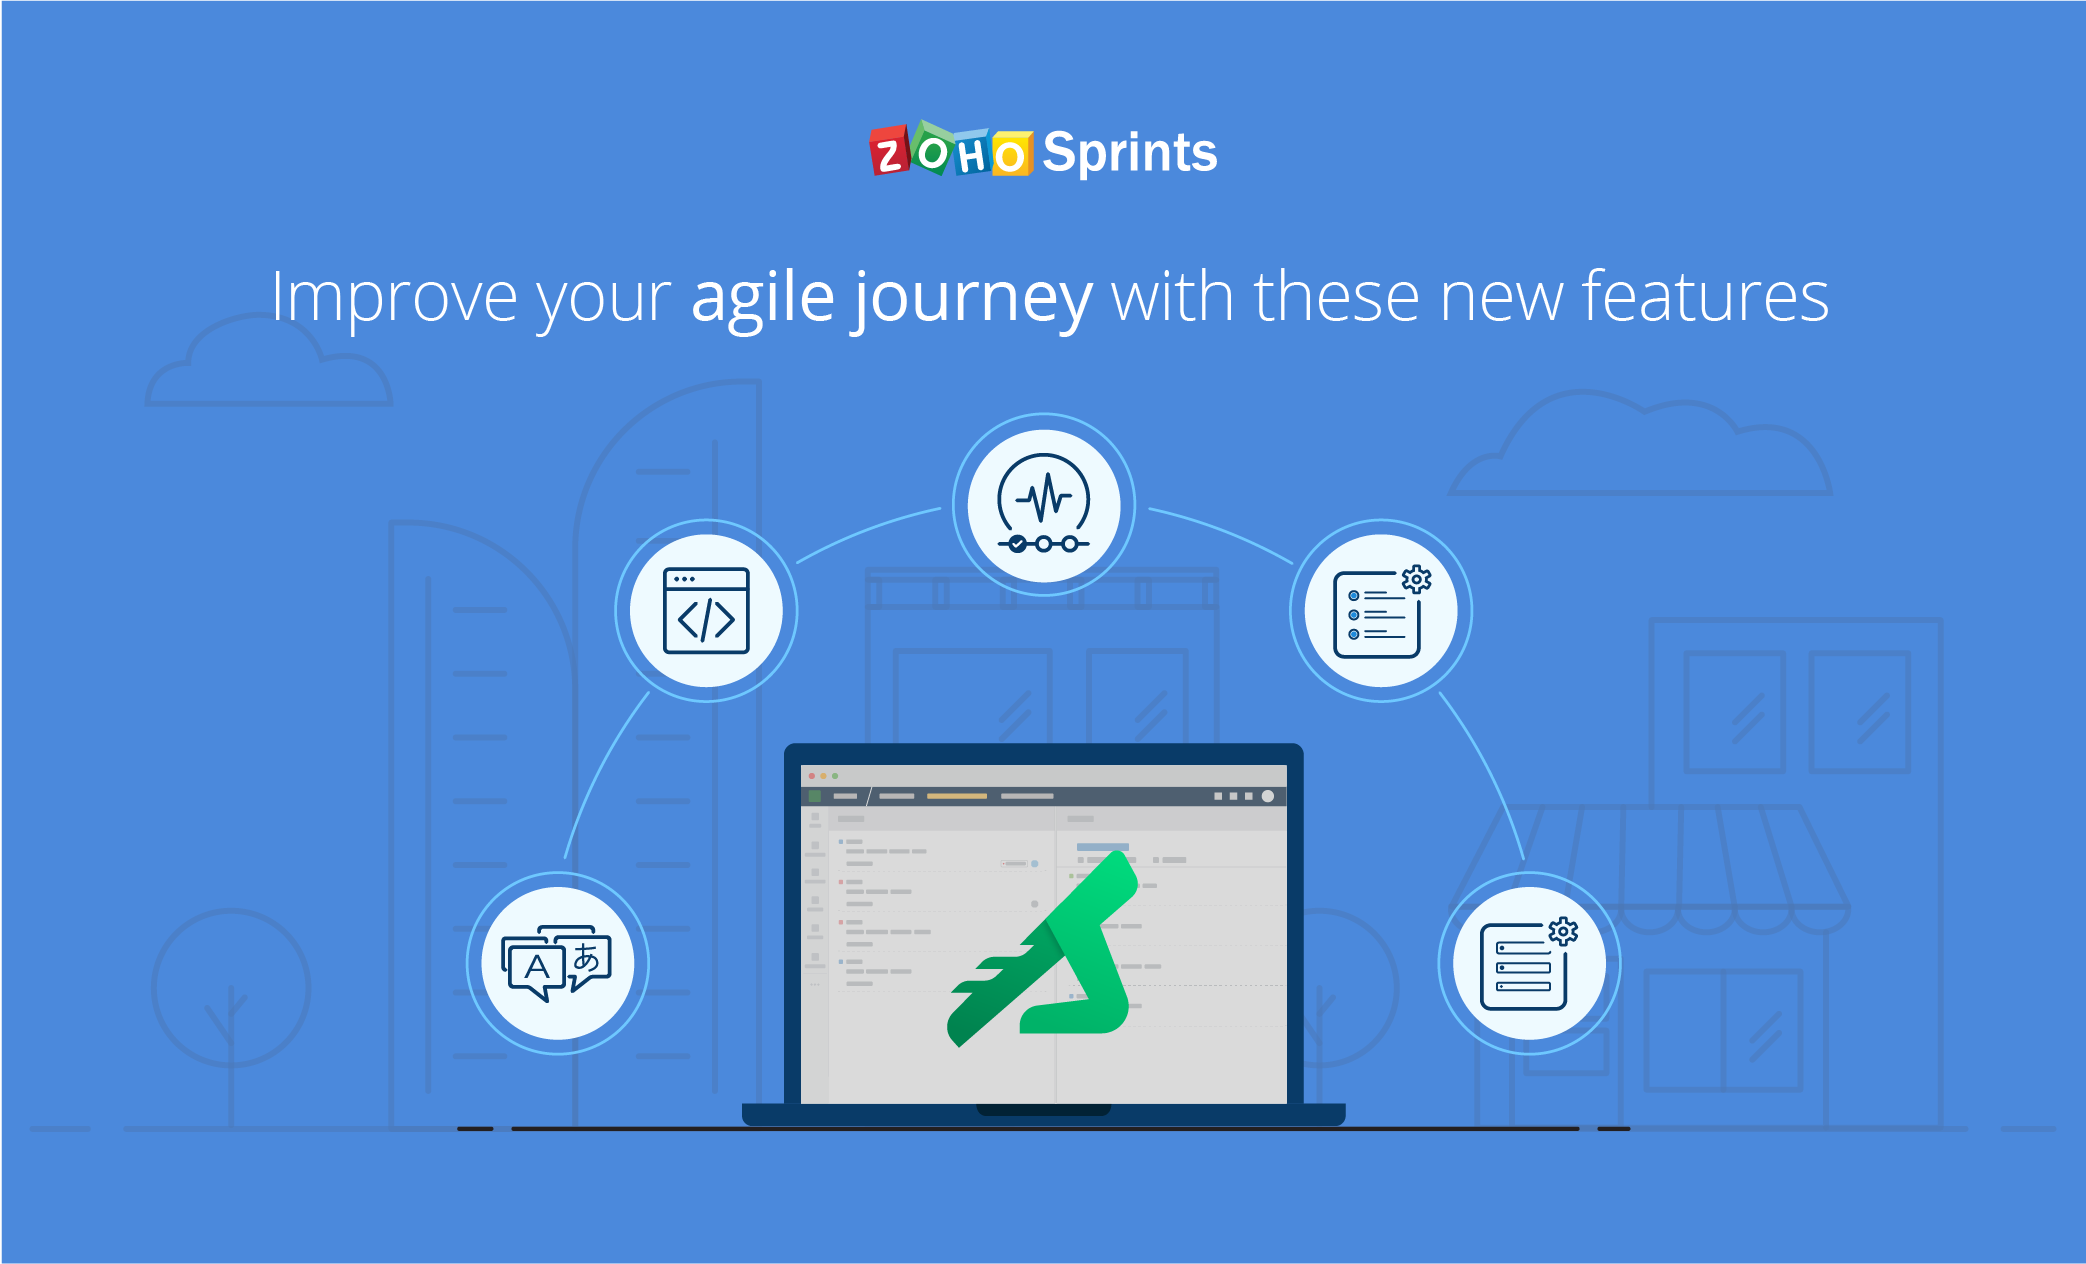 Explore our brand new features in Zoho Sprints